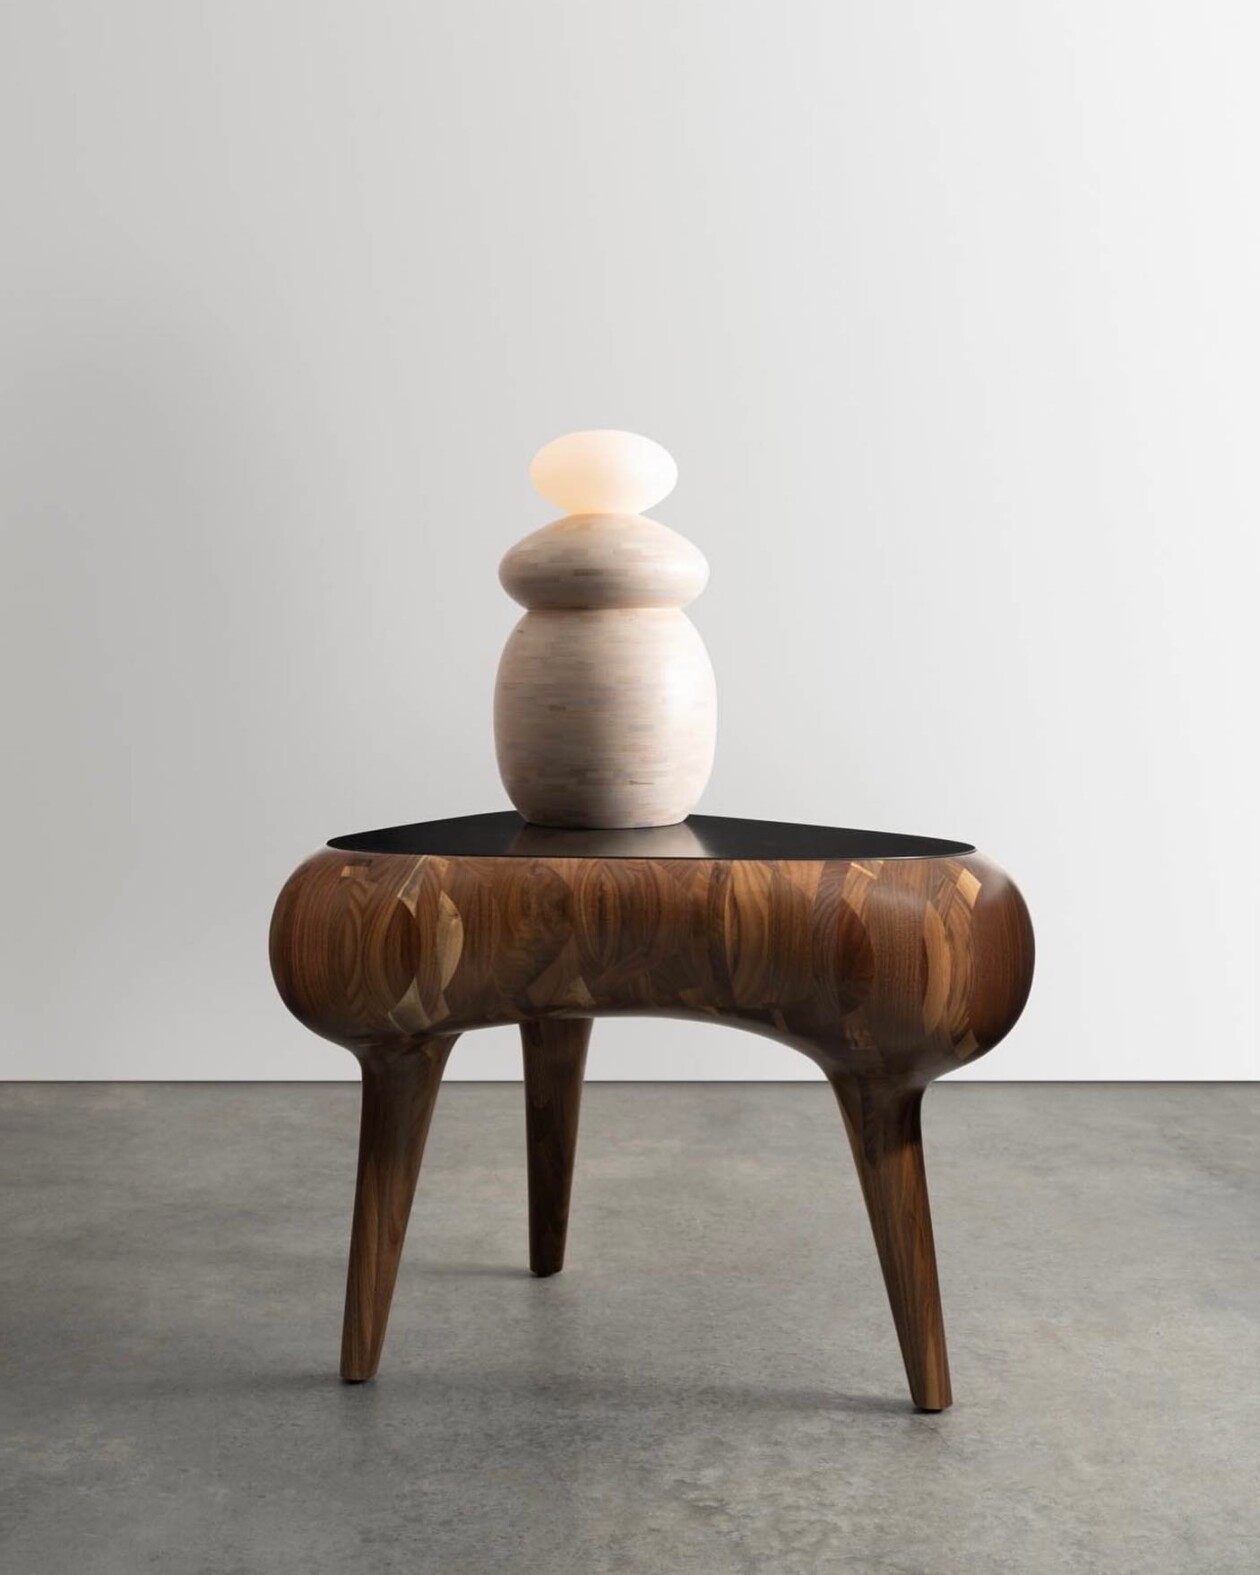 Elegant Sculptural Objects And Furniture By Richard Haining (13)